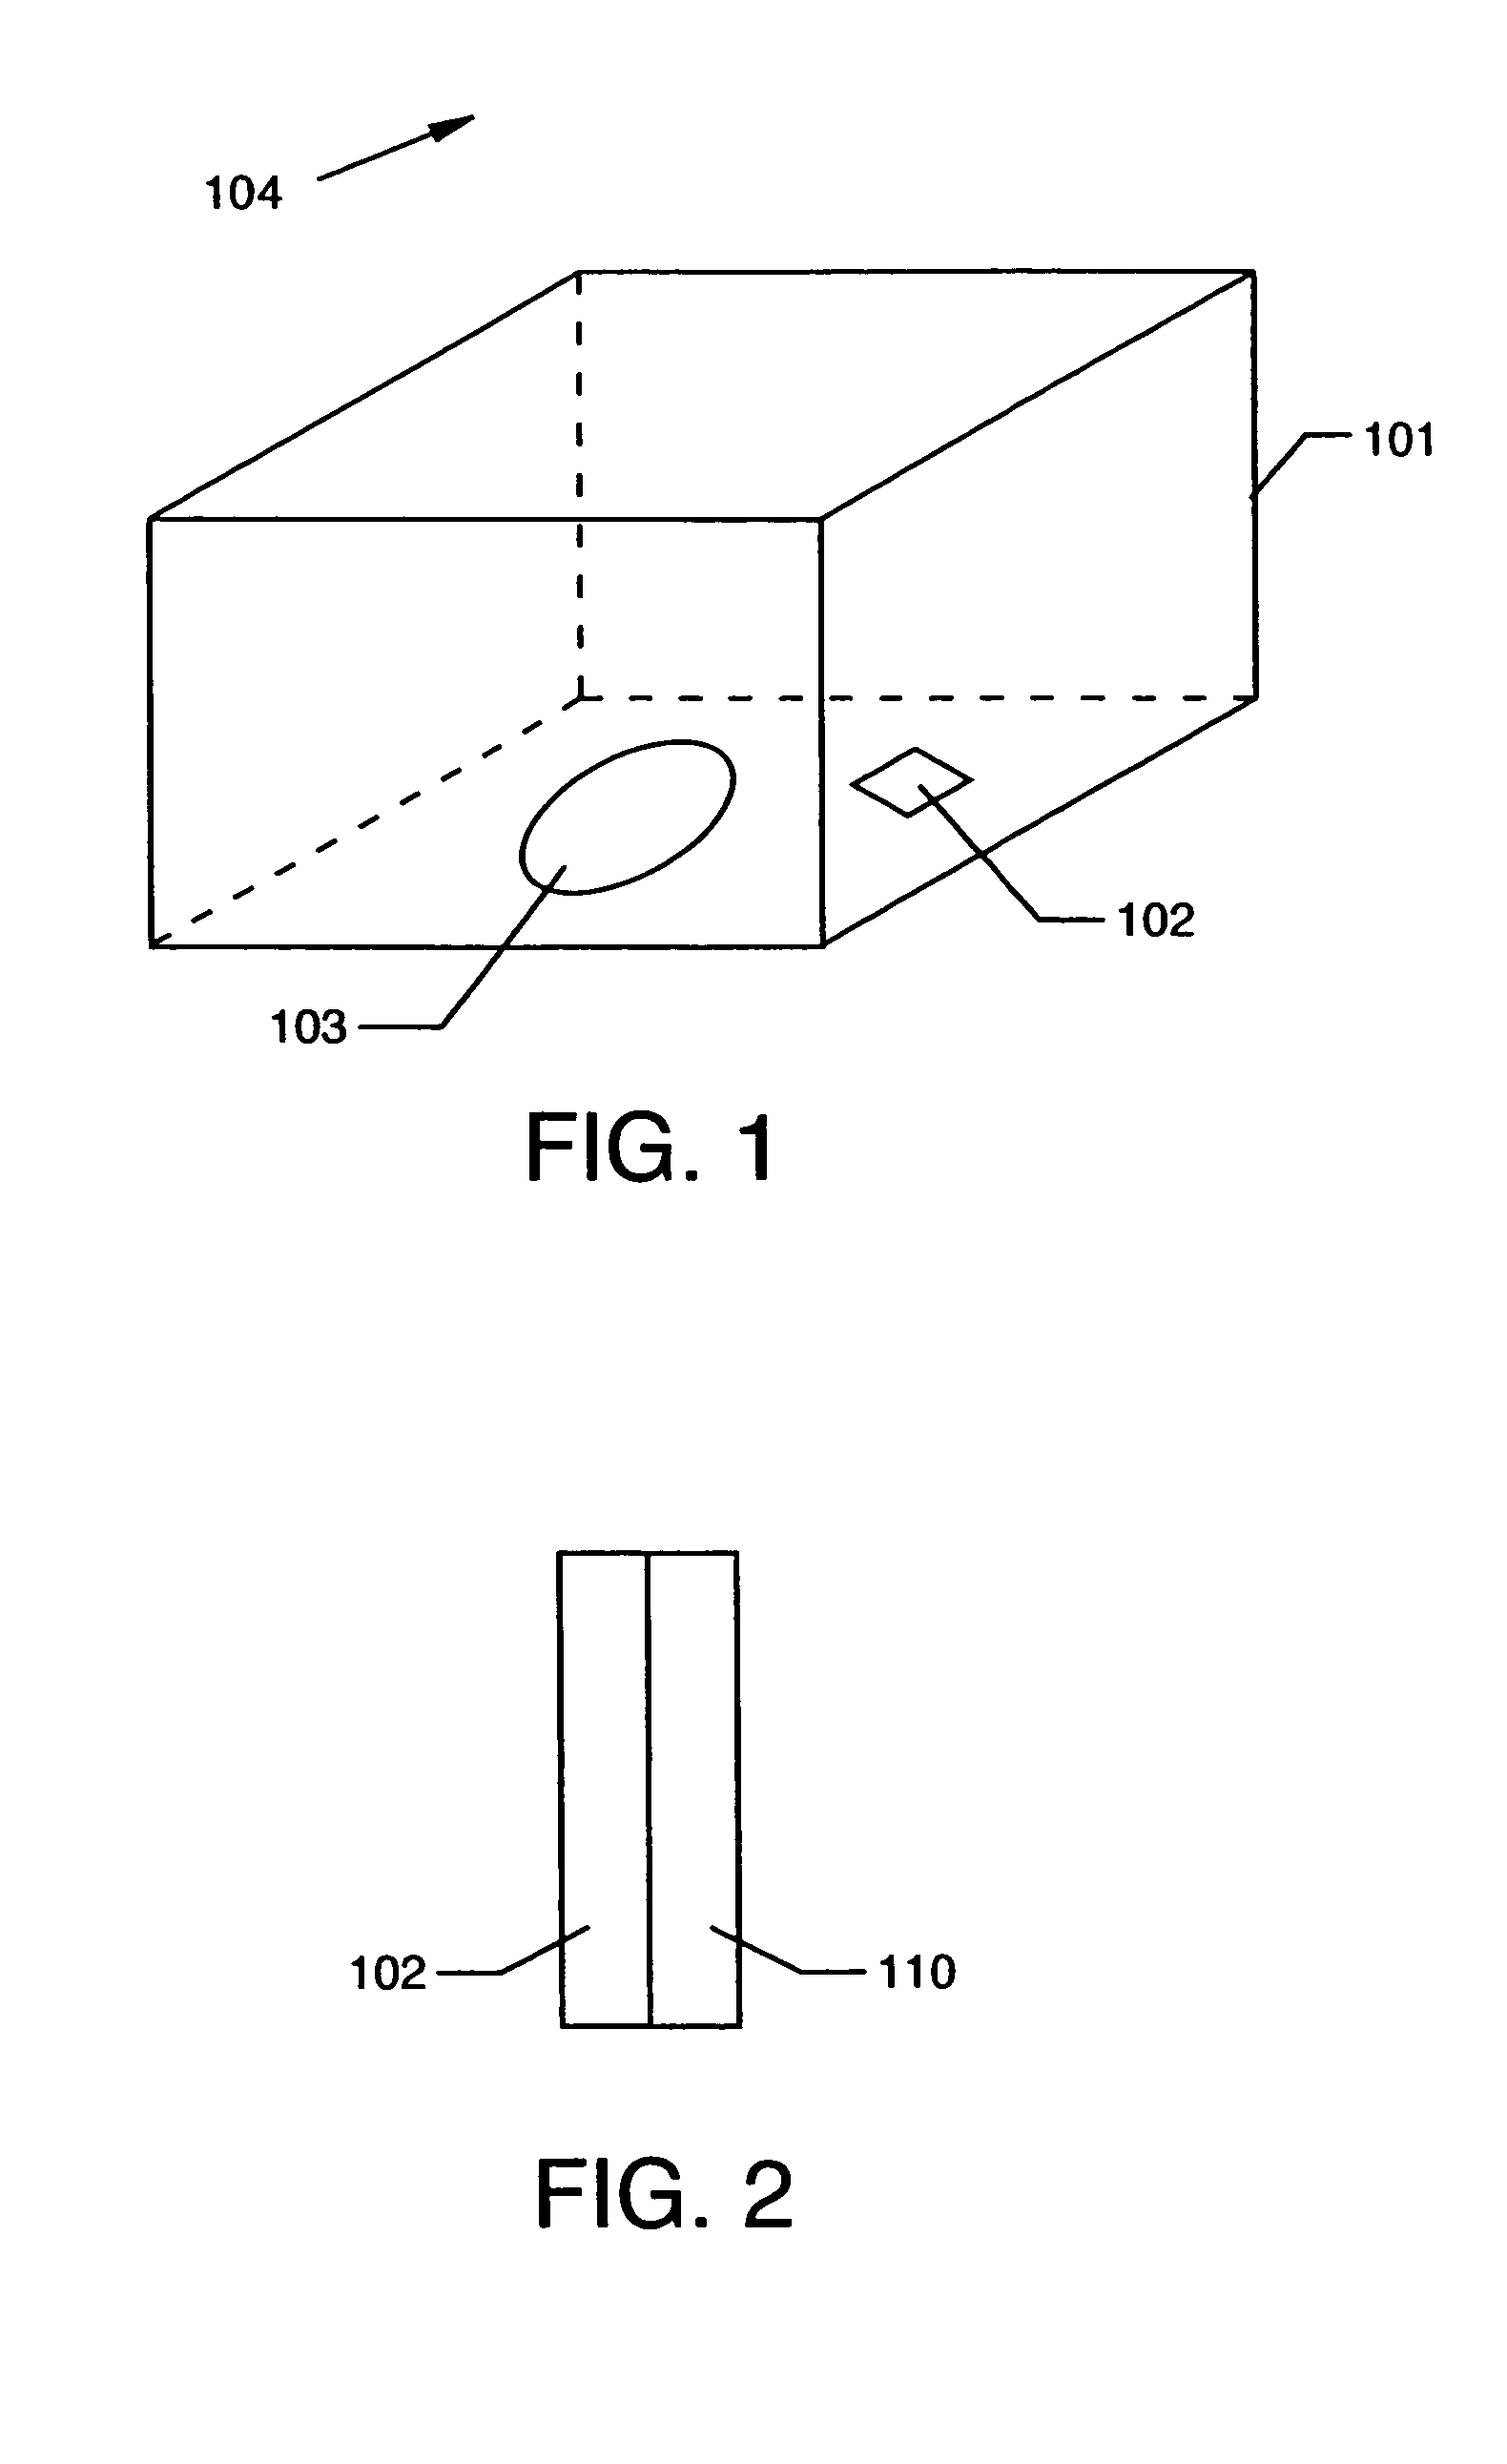 Packaging system with oxygen sensor for gas inflation/evacuation system and sealing system